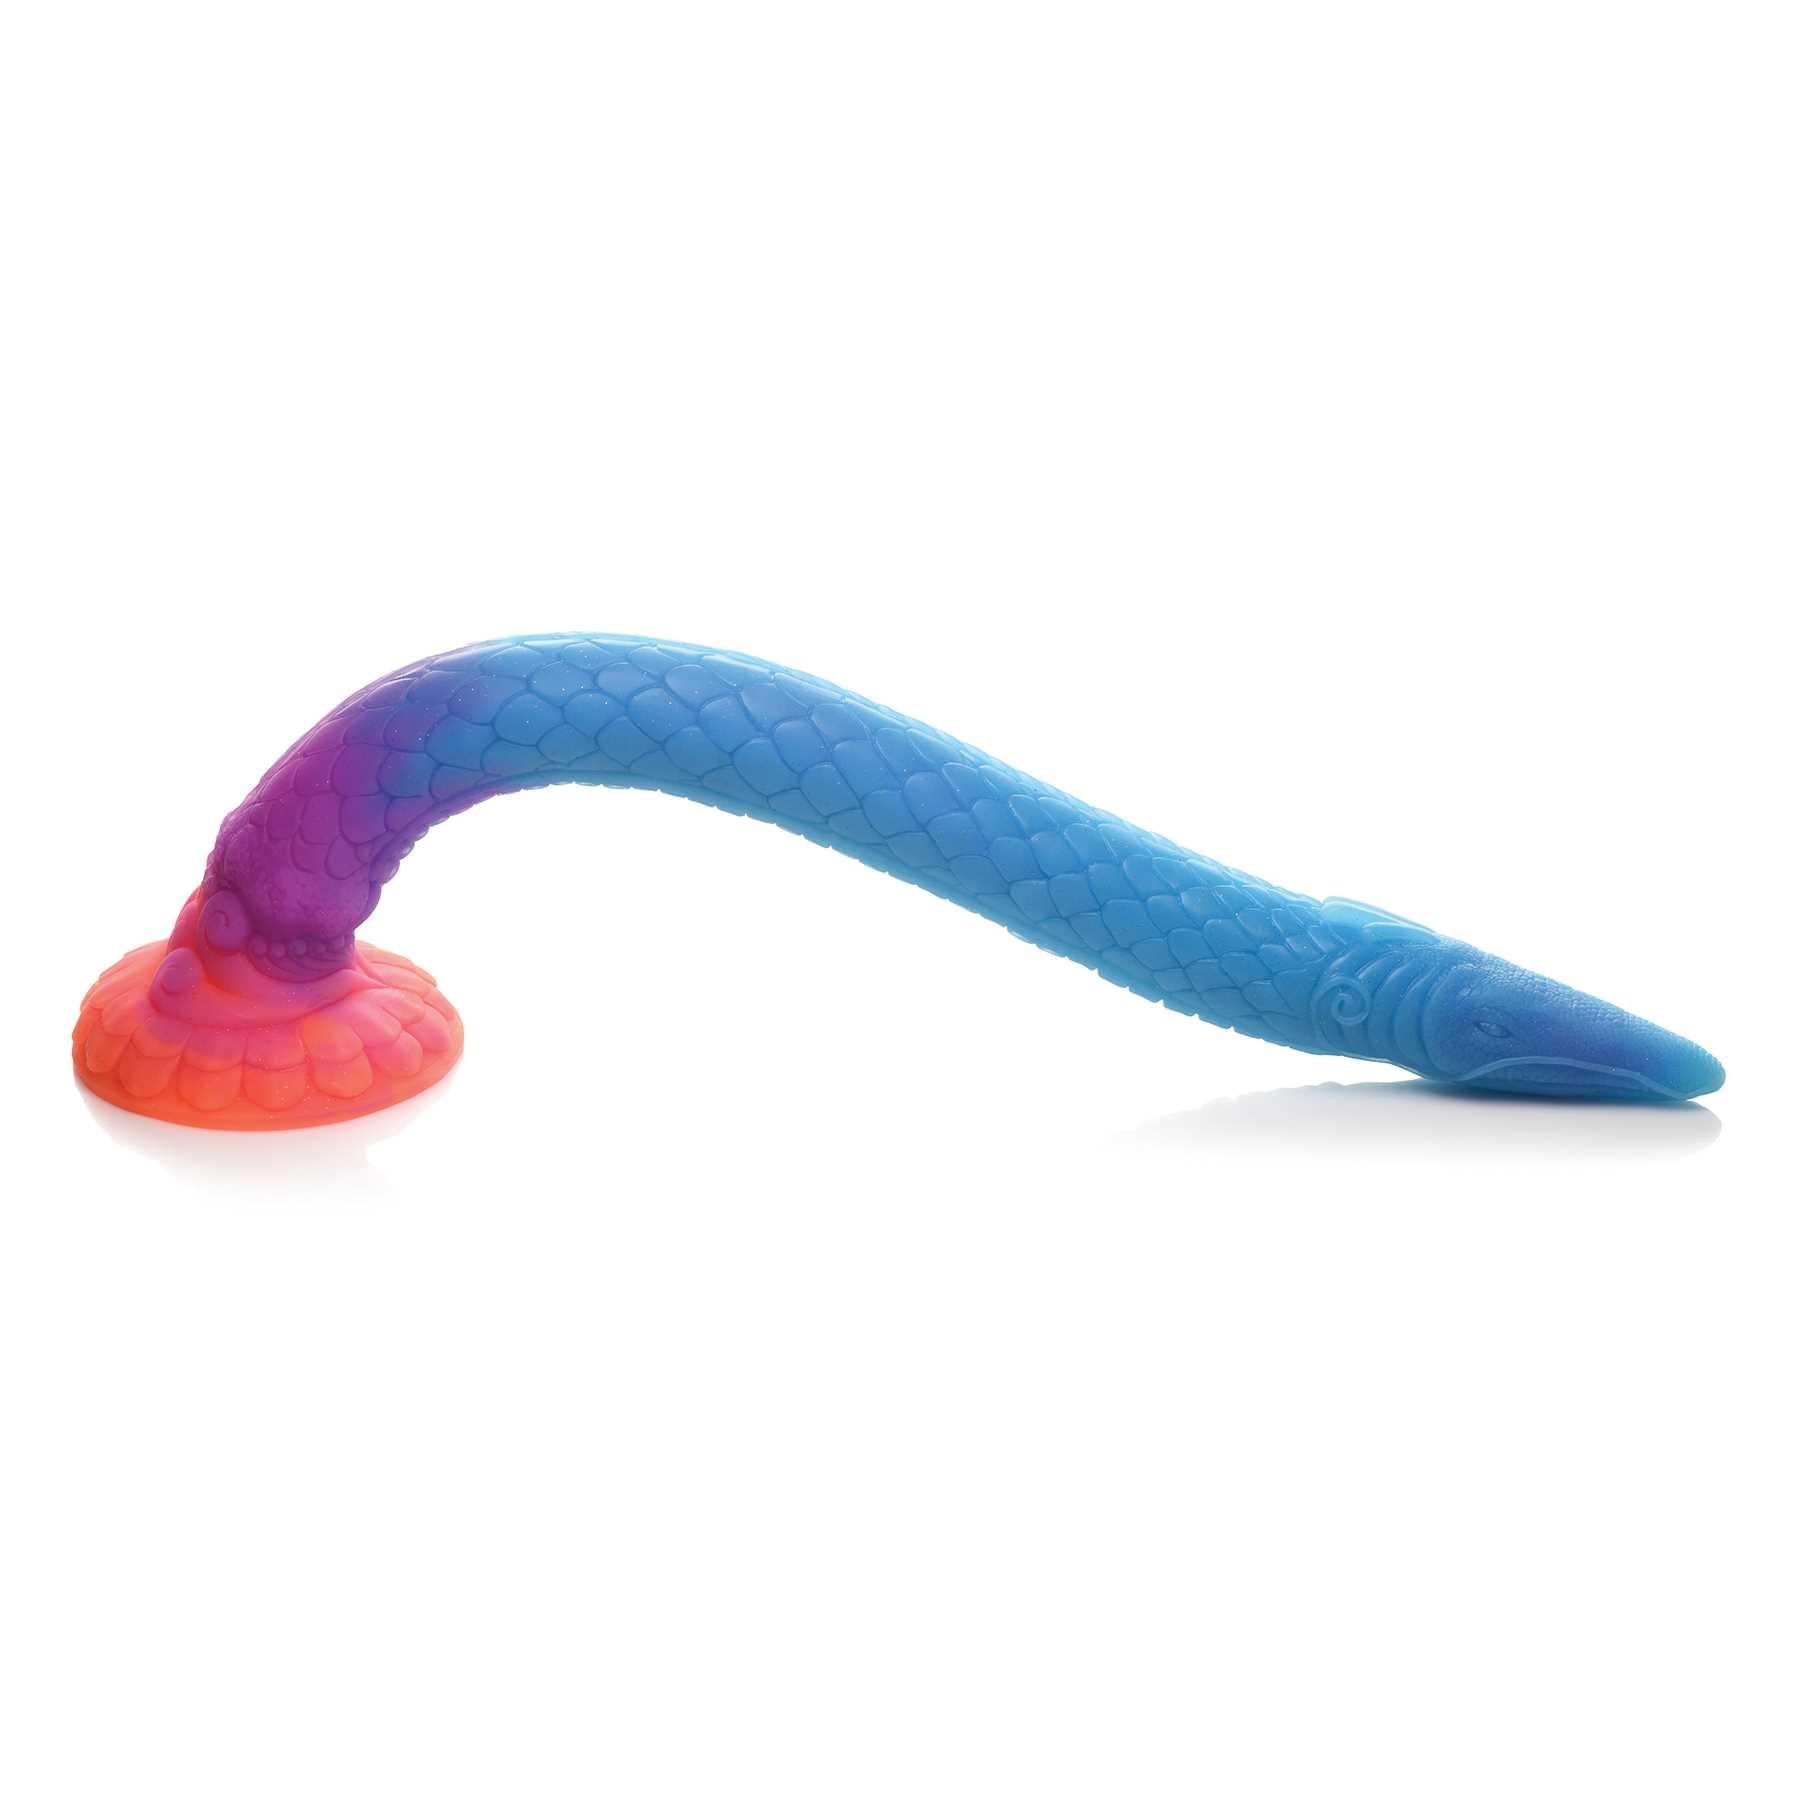 Mikara - Glow-in-the-Dark Silicone Snake Dildo suction cupped to table top